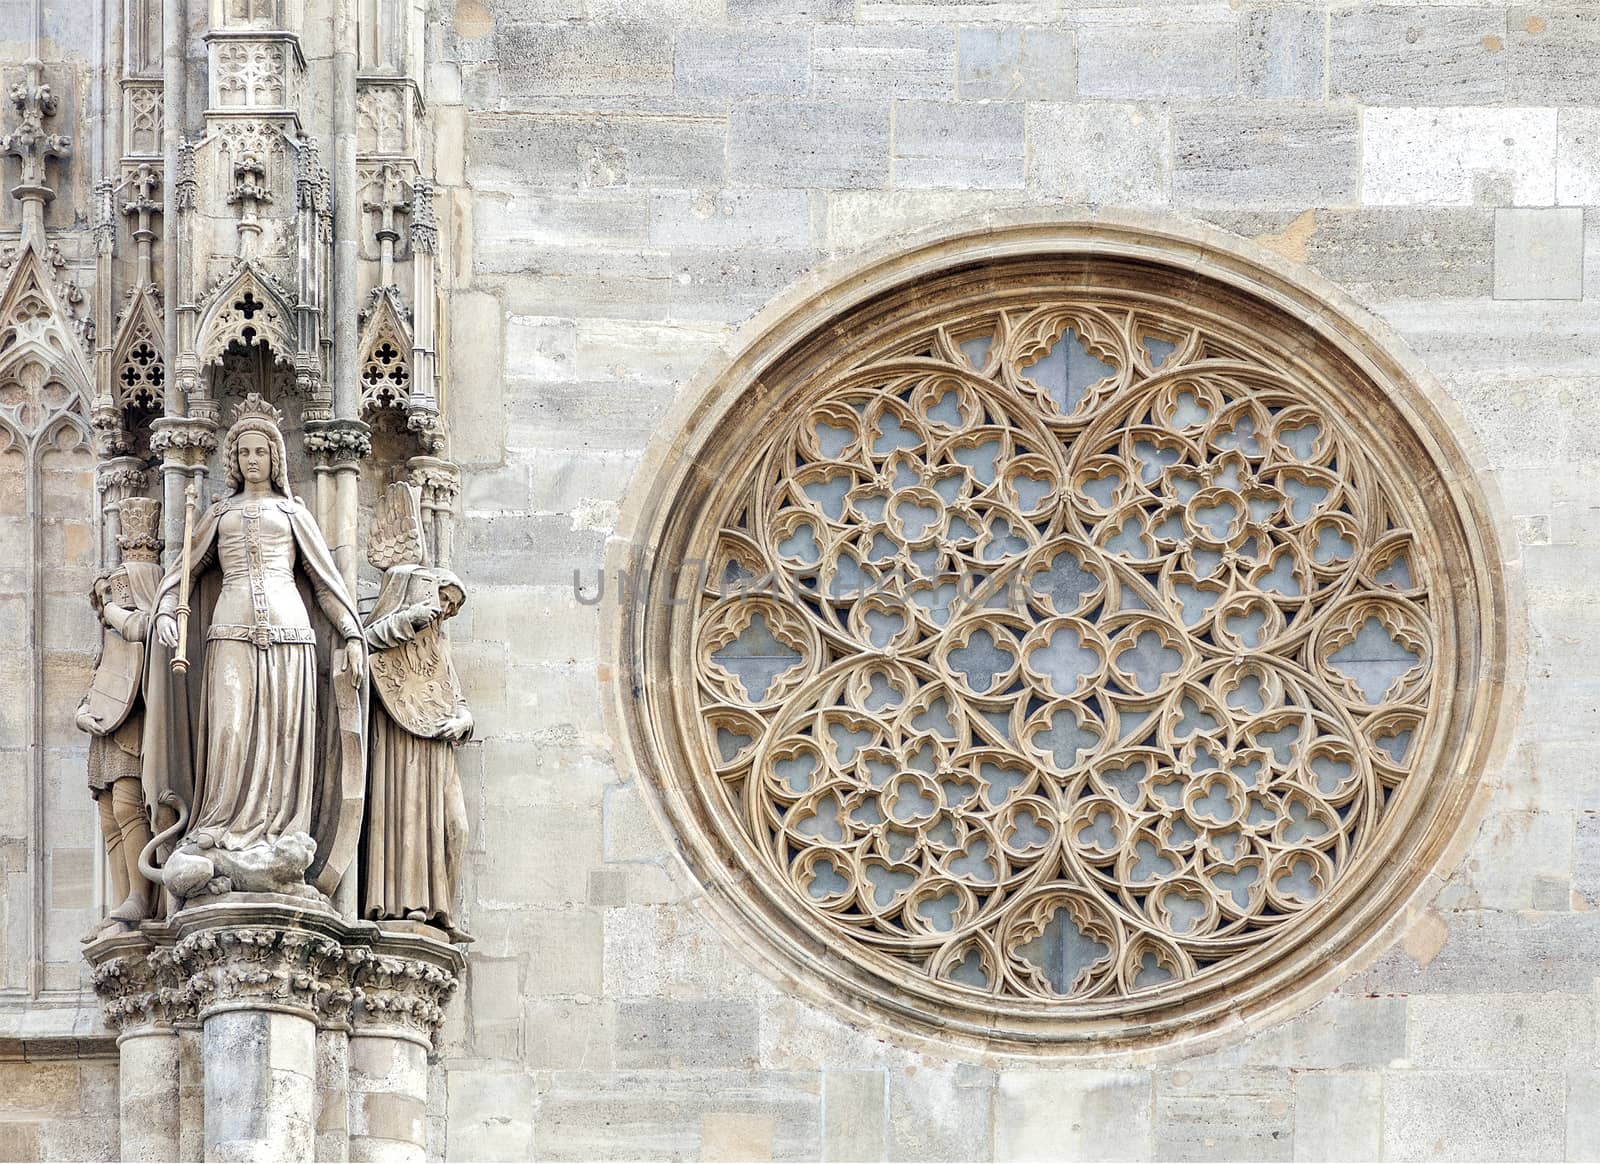 Round gothic window on the facade of the St. Stephen's cathedral, Vienna by Goodday